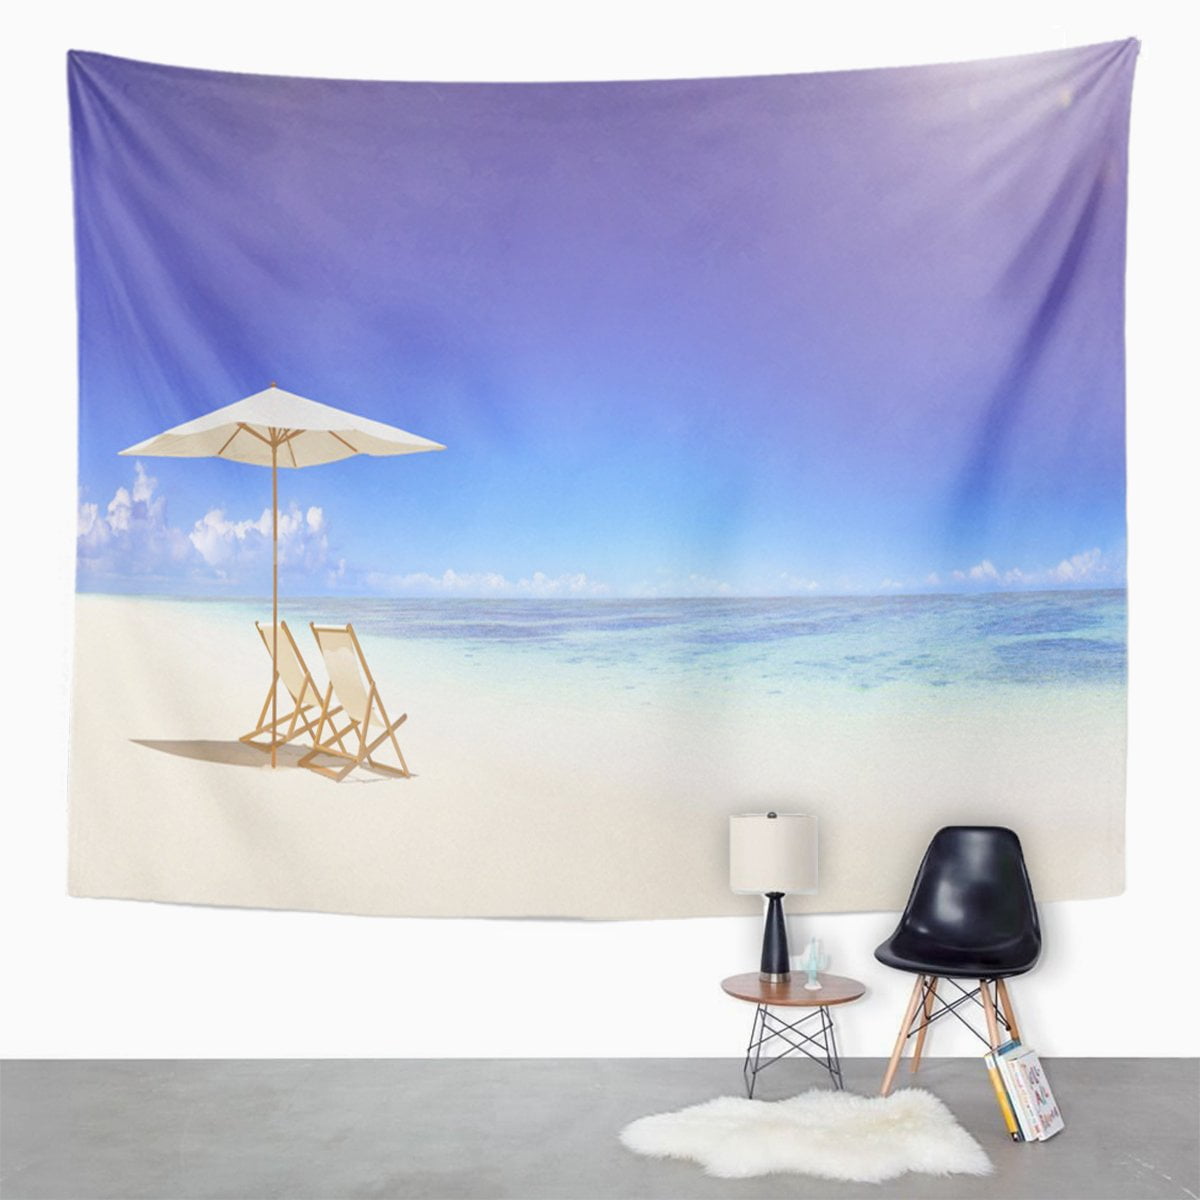 ZEALGNED Blue Umbrella Deck Chair Tropical Beach Scene Peaceful White Wall  Art Hanging Tapestry Home Decor for Living Room Bedroom Dorm 60x80 inch